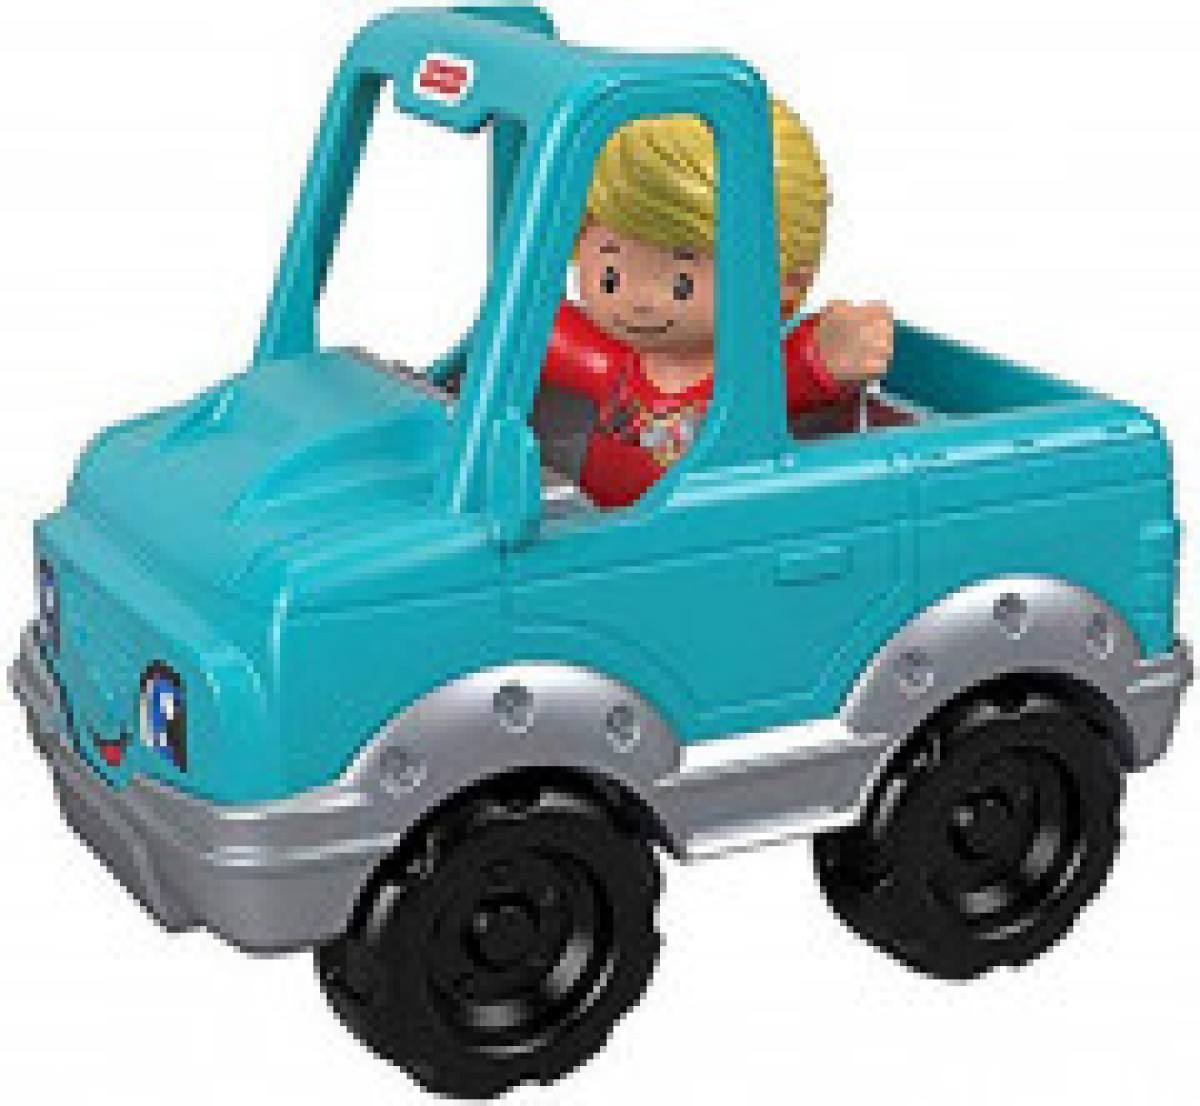 fisher price blue truck